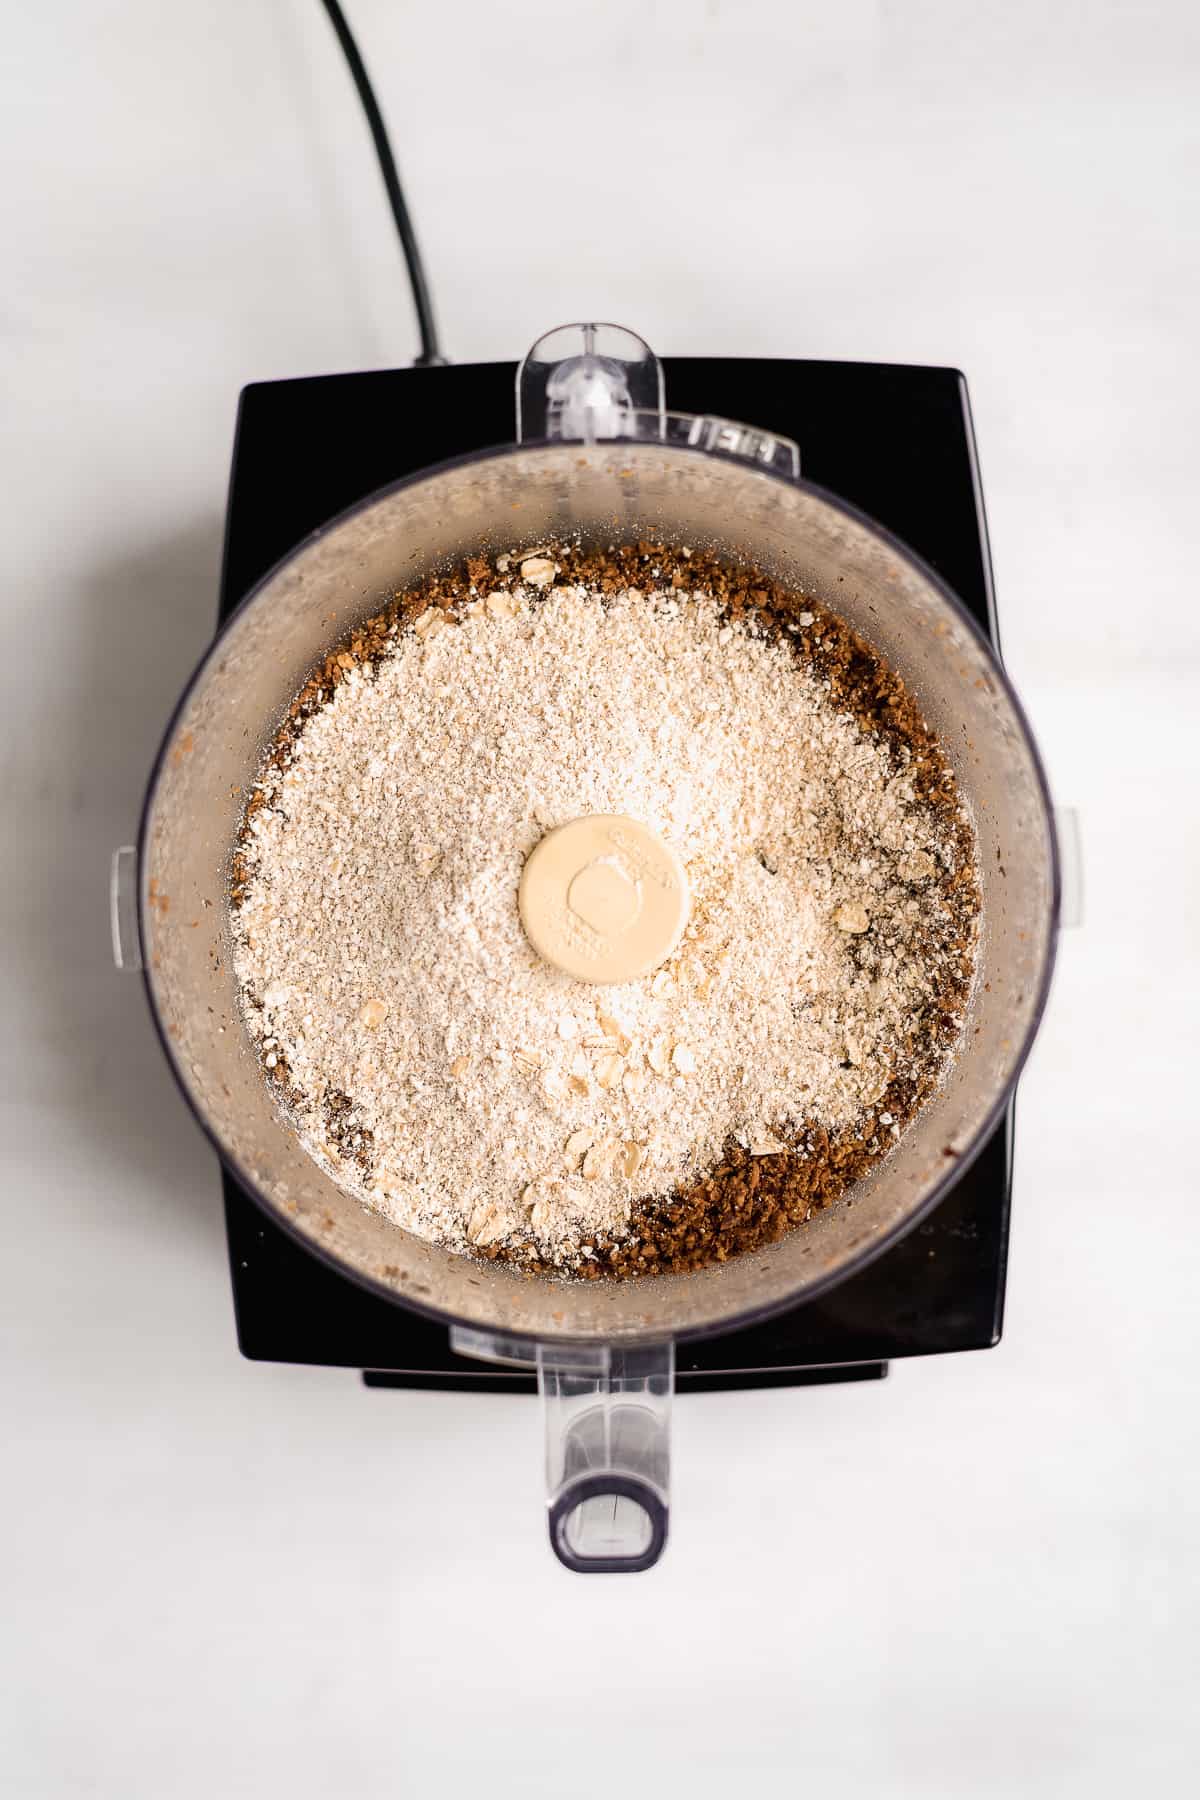 Oat flour about to be mixed into a food processor.